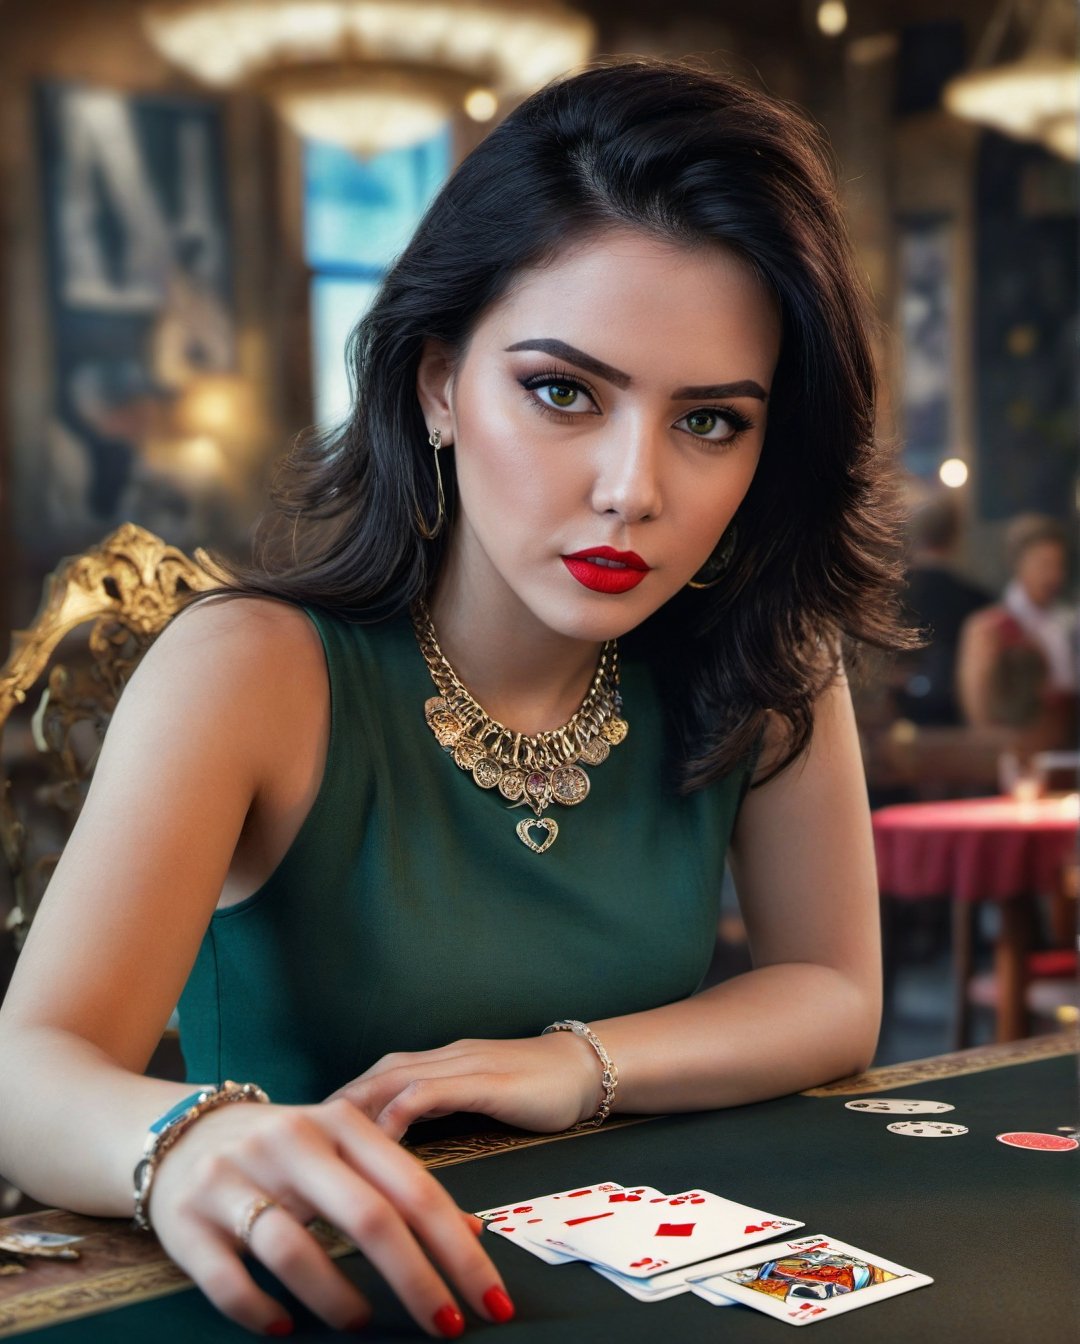 Extremely Realistic, 4K HDR Image, 
1girl, solo, black hair, holding, jewelry, necklace, bracelet, lipstick, watch, upside-down, realistic, card, playing card



Image Quality & Style

In frame, accurate perspective, vibrant, Sharp, focus, Clear, vibrant colors, vibrant lighting, natural lighting,  natural setting, realism, naturalism, detailed, Natural, realistic, high contrast, natural color contrast, photo, accurate, rich colors, bold, accurate colors, eye-catching, professional, authentic, real, cinematic, photo-perfect, lifelike, accurate details, detailed surroundings, accurate shadows & highlights, accurate lighting, photorealistic, high resolution, ultra detail, hyperrealistic, 4K True HDR, ,Enhanced Reality